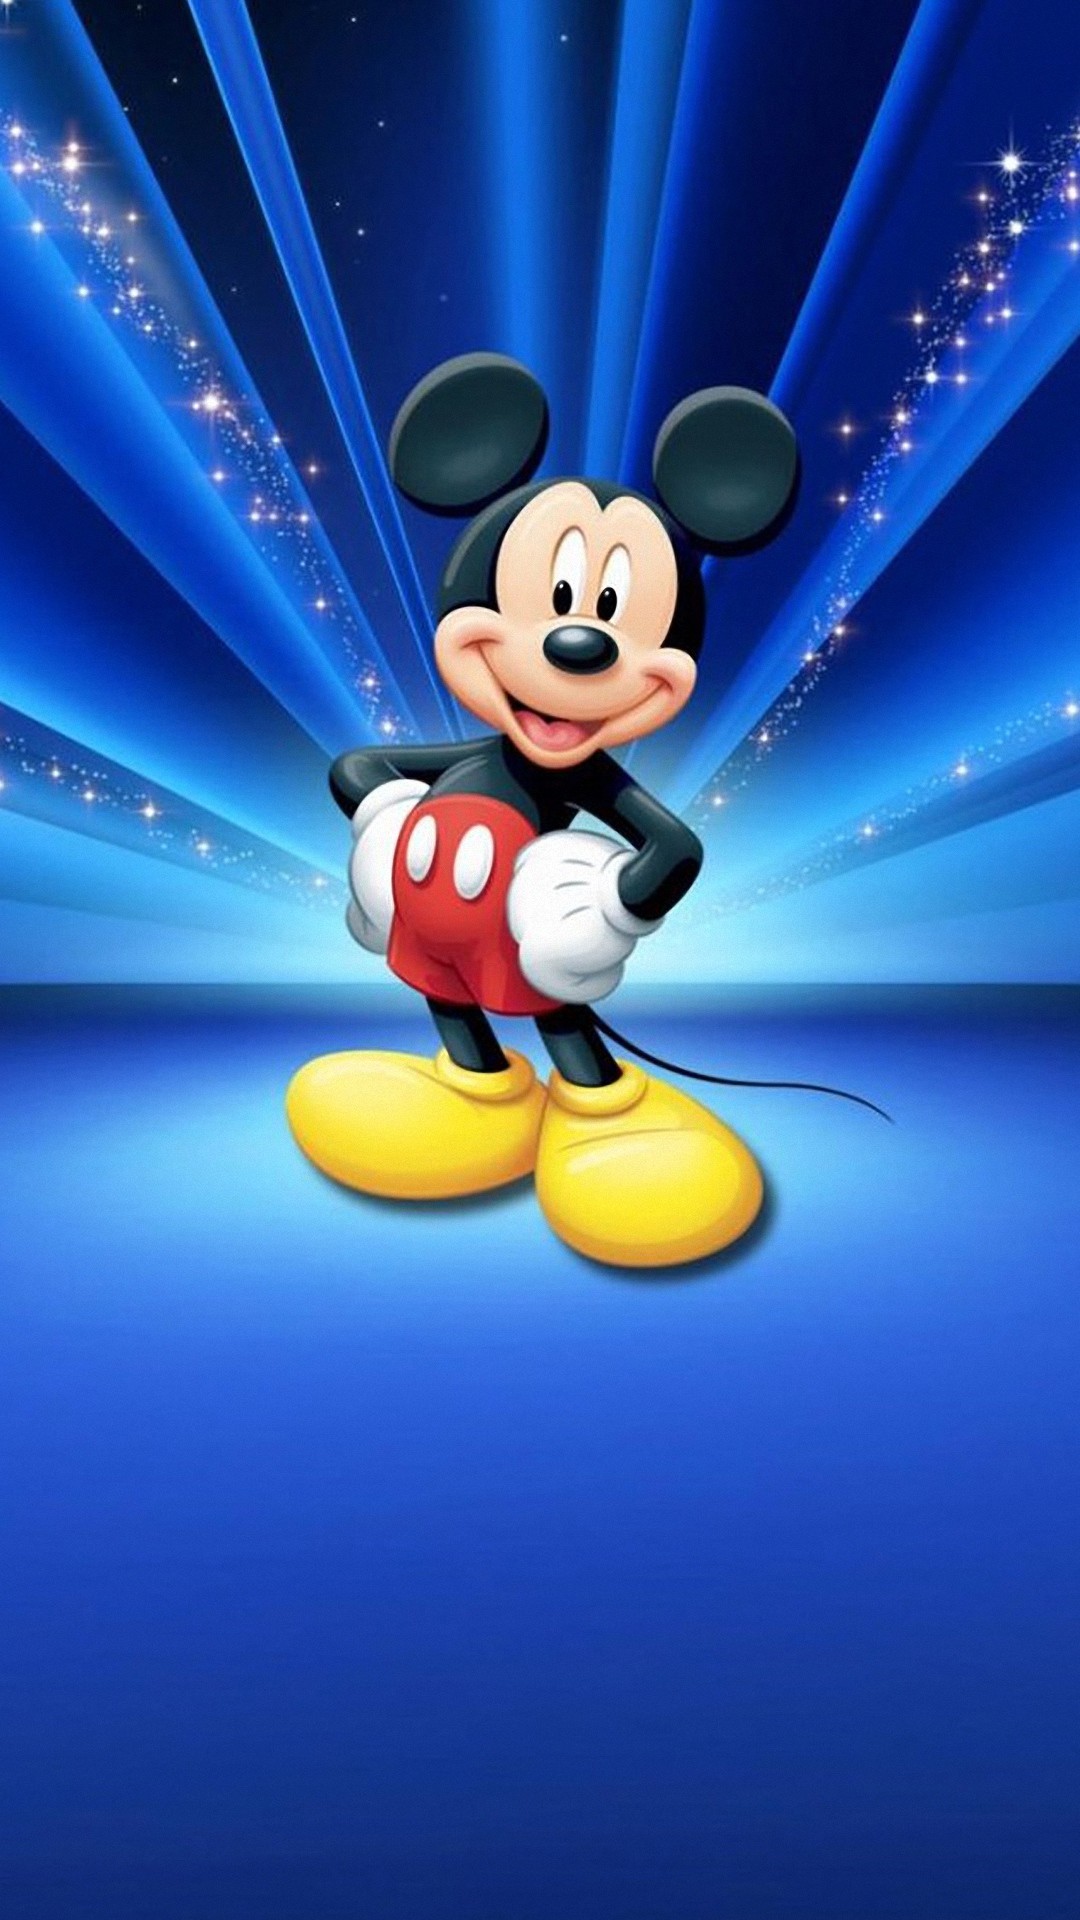 1080x1920 cartoon mickey wallpapers for samsung galaxy note 3